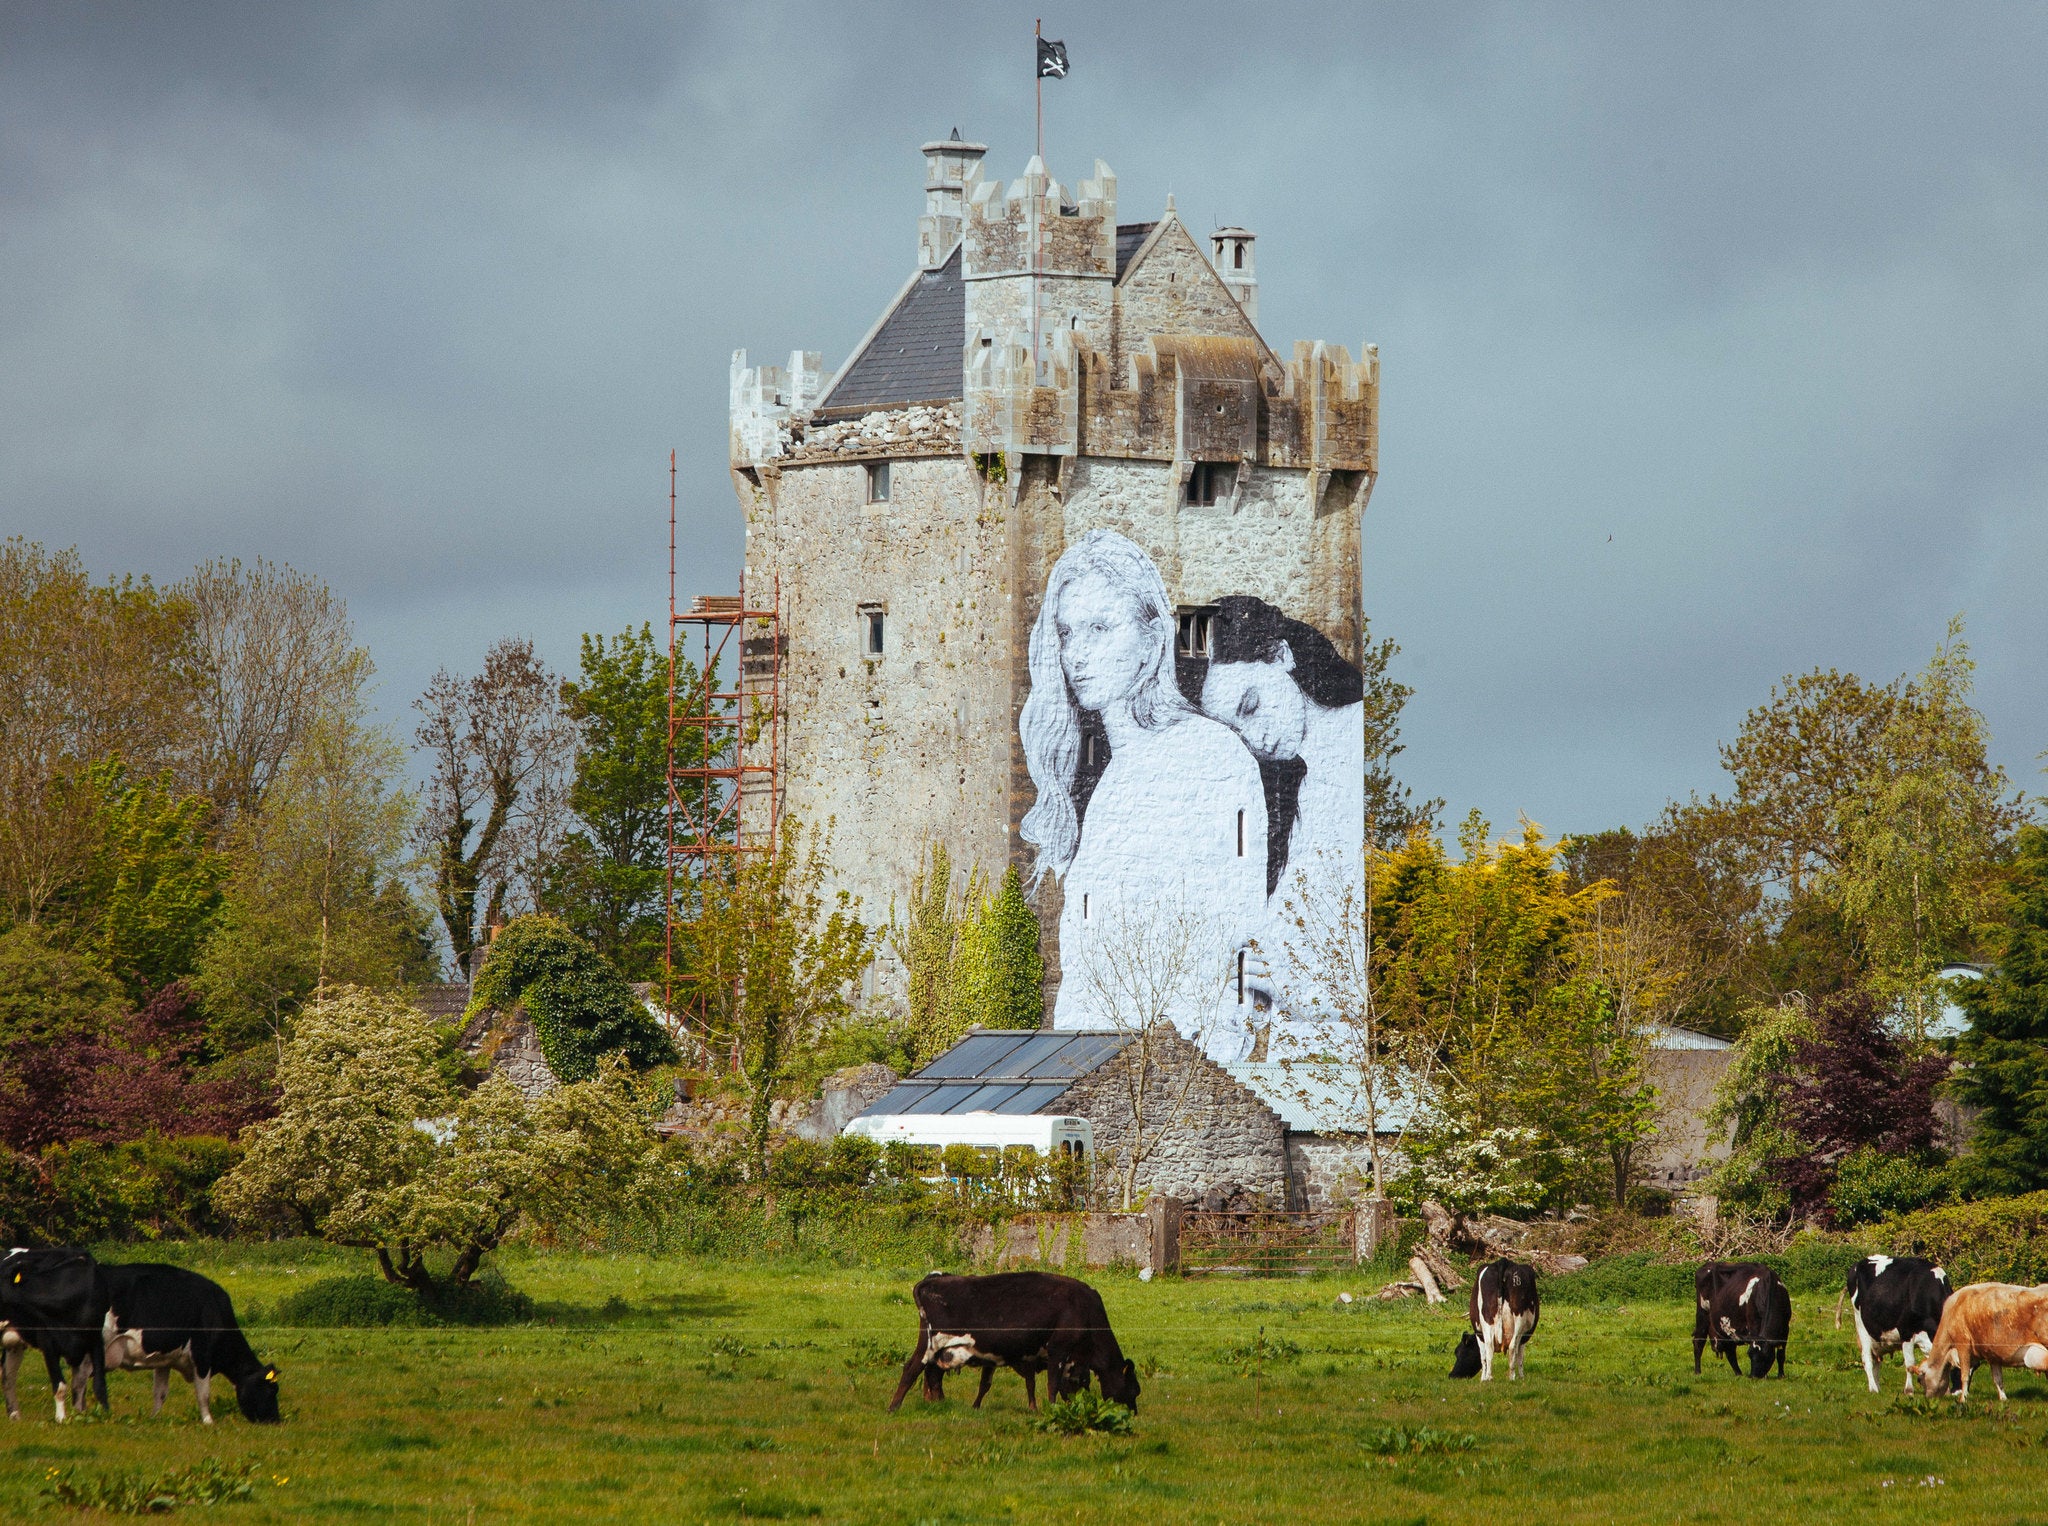 Joe Caslin's mural on a castle in County Galway was installed days before the referendum. Photo: David Sexton